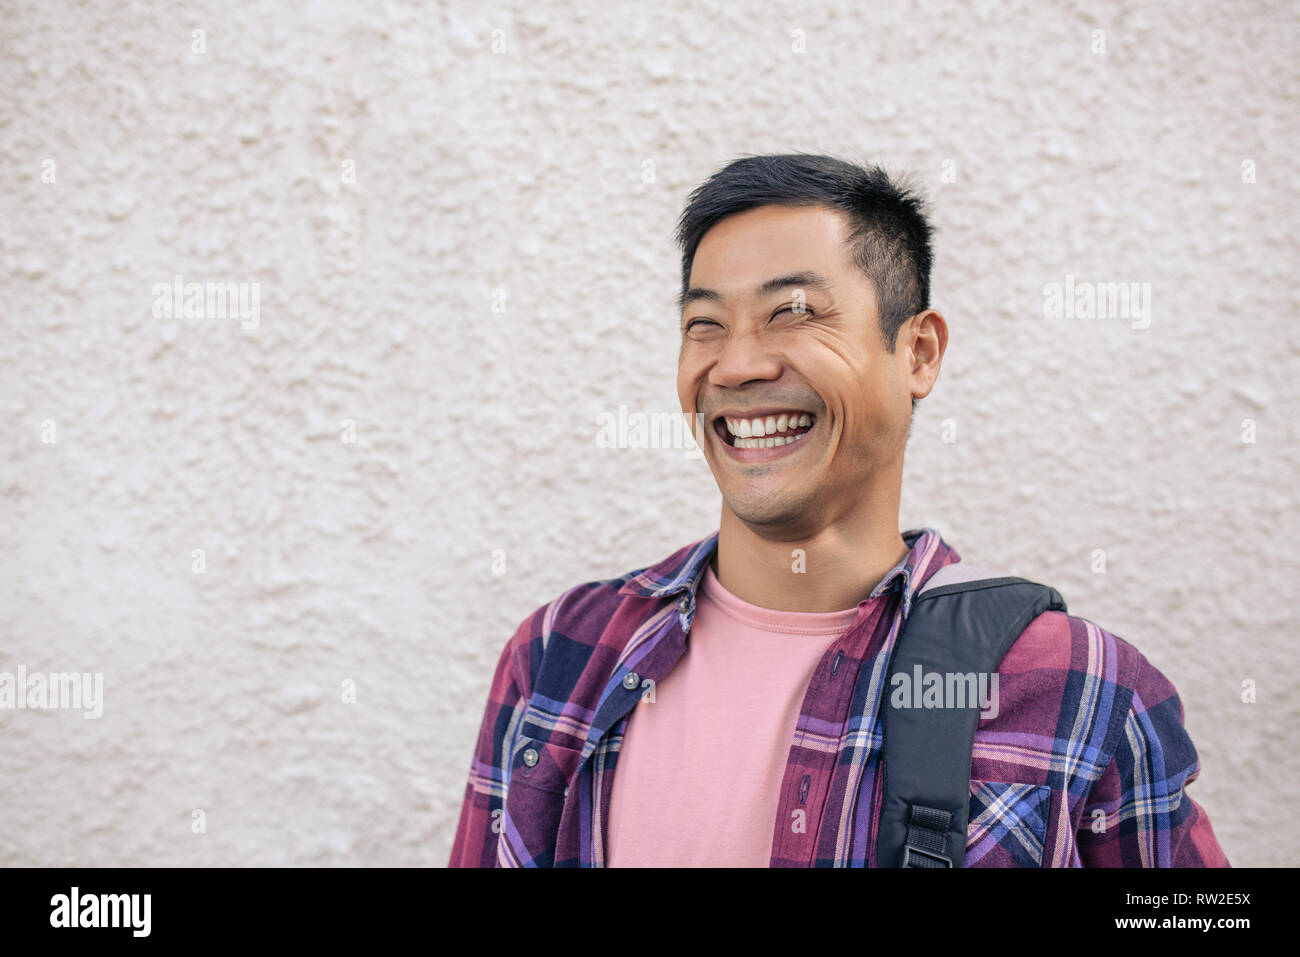 Young Asian man standing on a city street laughing Stock Photo